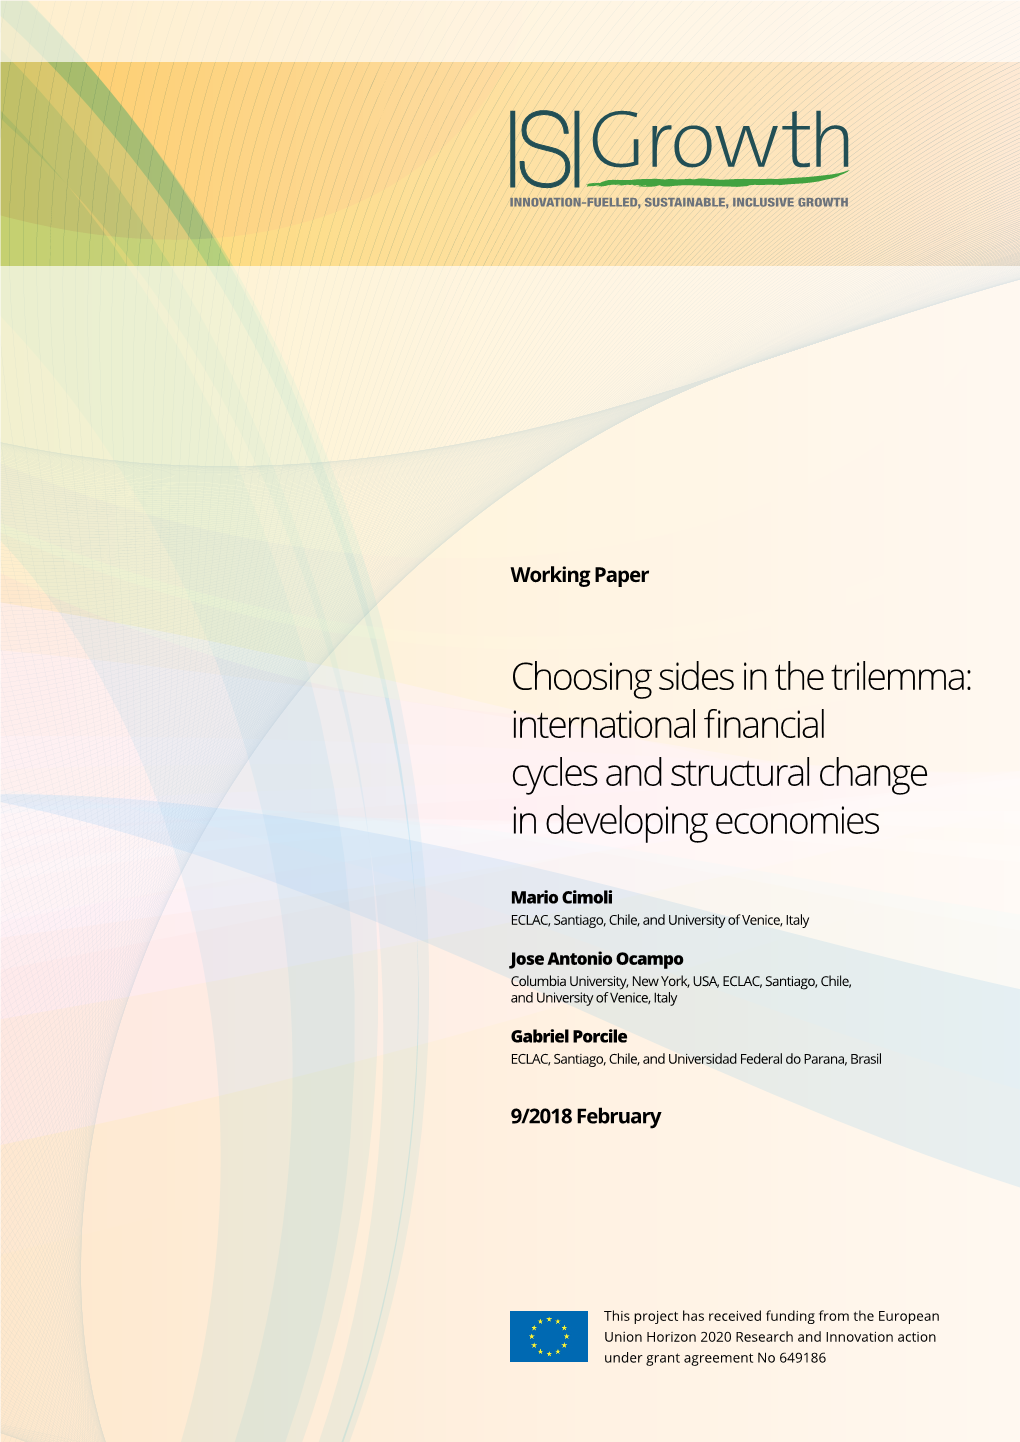 Choosing Sides in the Trilemma: International Financial Cycles and Structural Change in Developing Economies